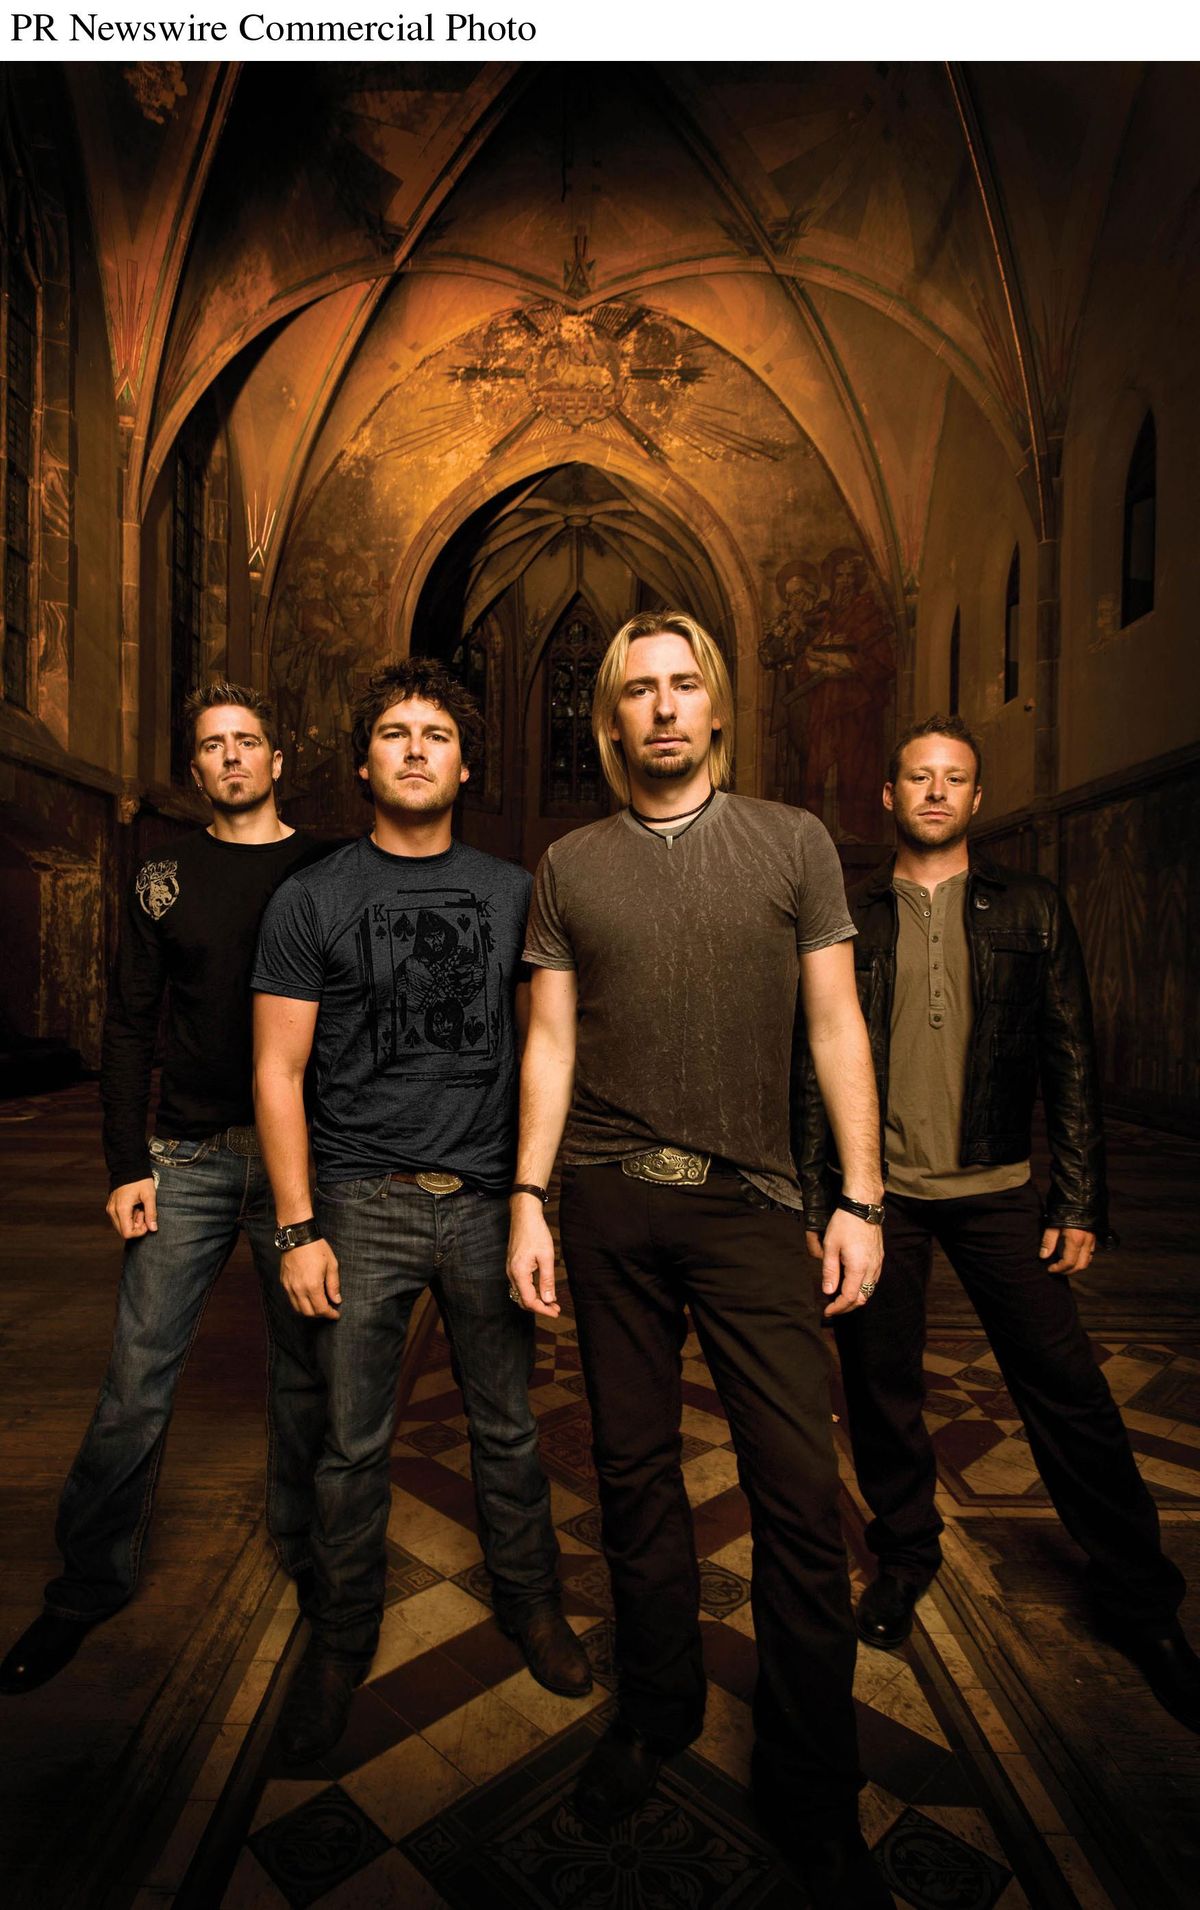 Nickelback lead singer Chad Kroeger has said all the hating has been a boon to the group. (PR NEWSWIRE)